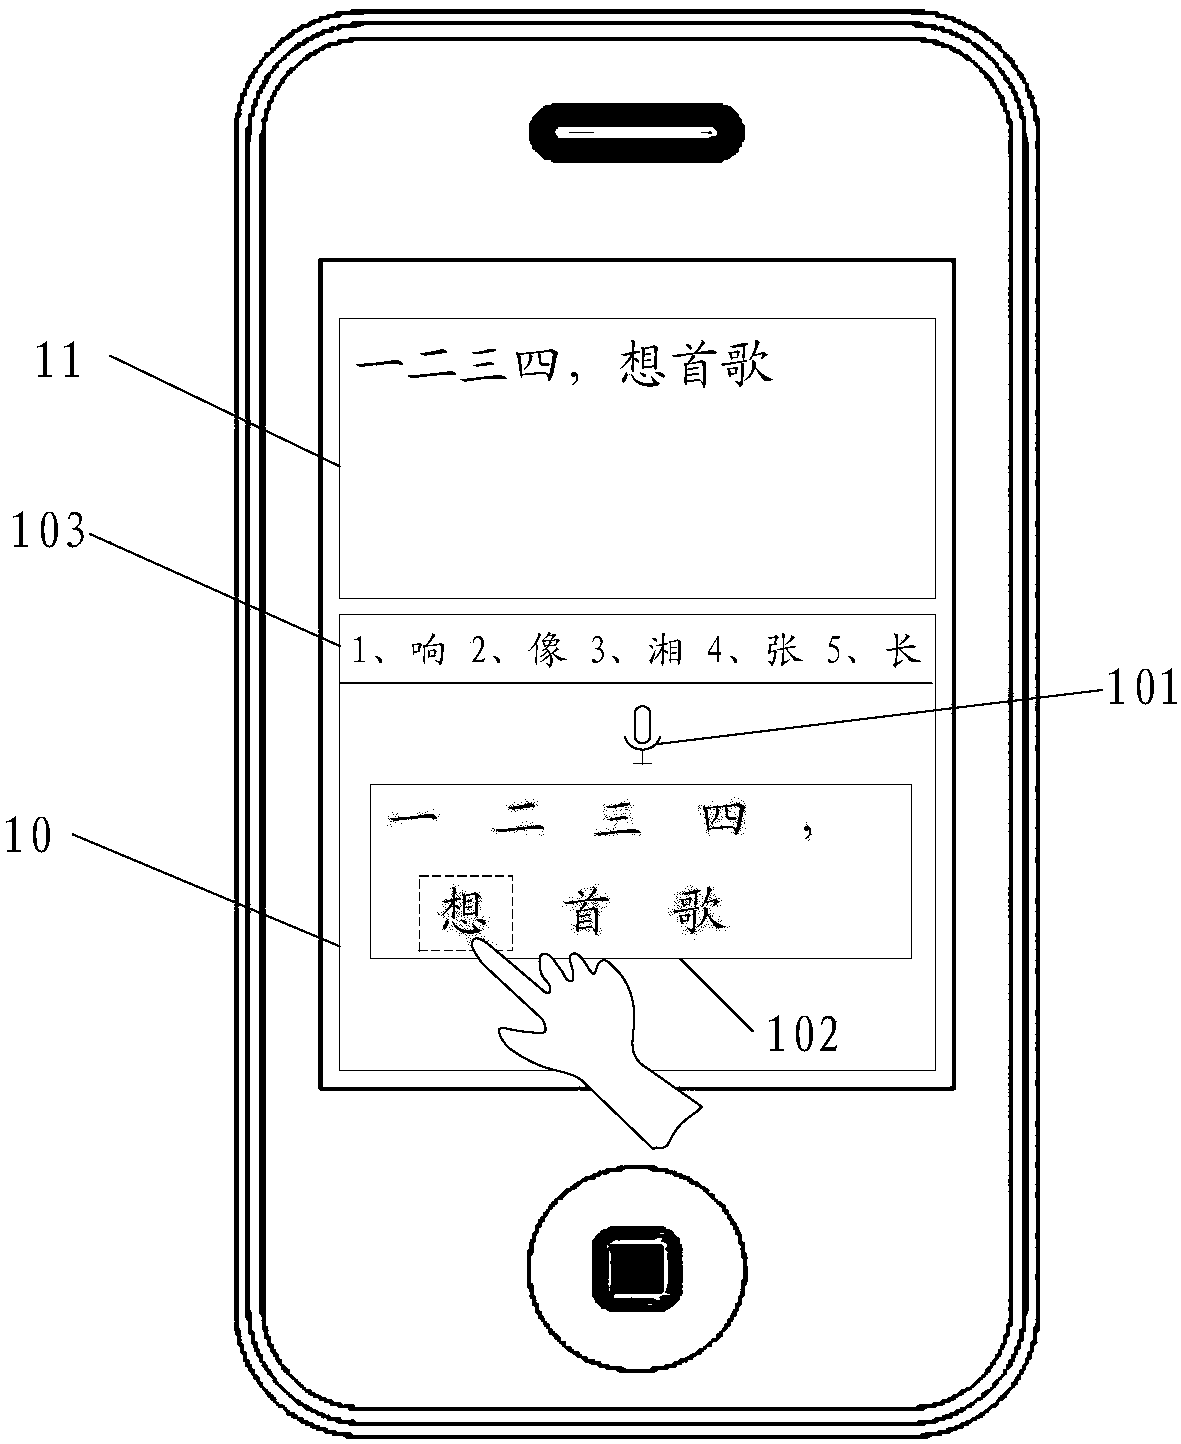 Character string error correction method and device